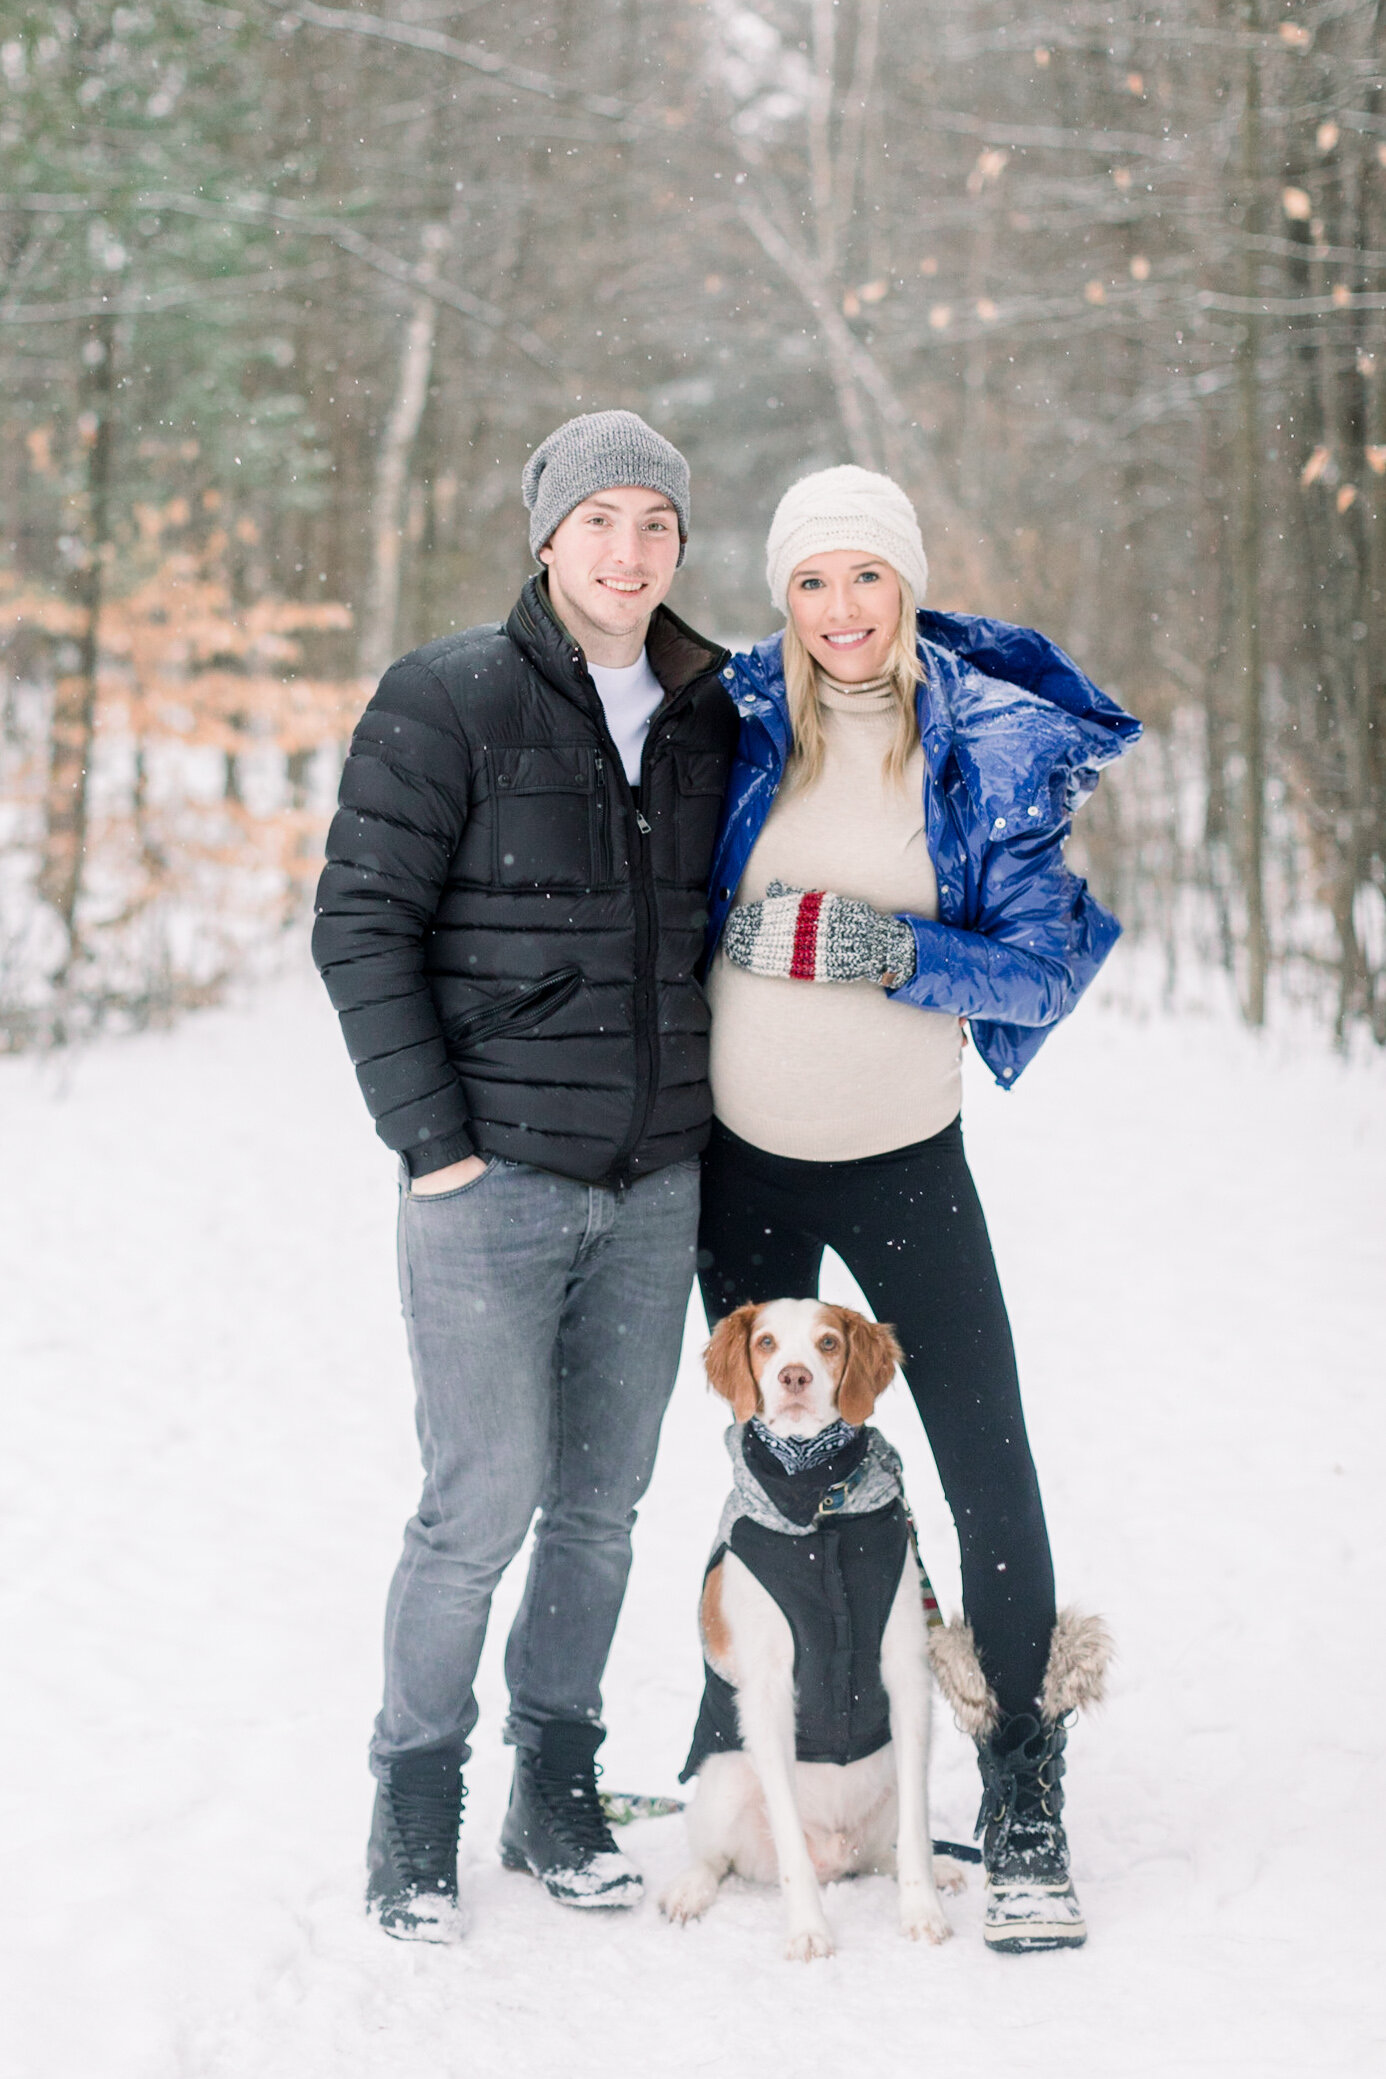  A beautiful little family stand in the snow as she cradles her baby bump in snow covered Pinhey’s Trail In Ottawa. Maternity session goals winter maternity session couple goals puppy goals outdoor photo shoot inspiration ideas and goals winter clien